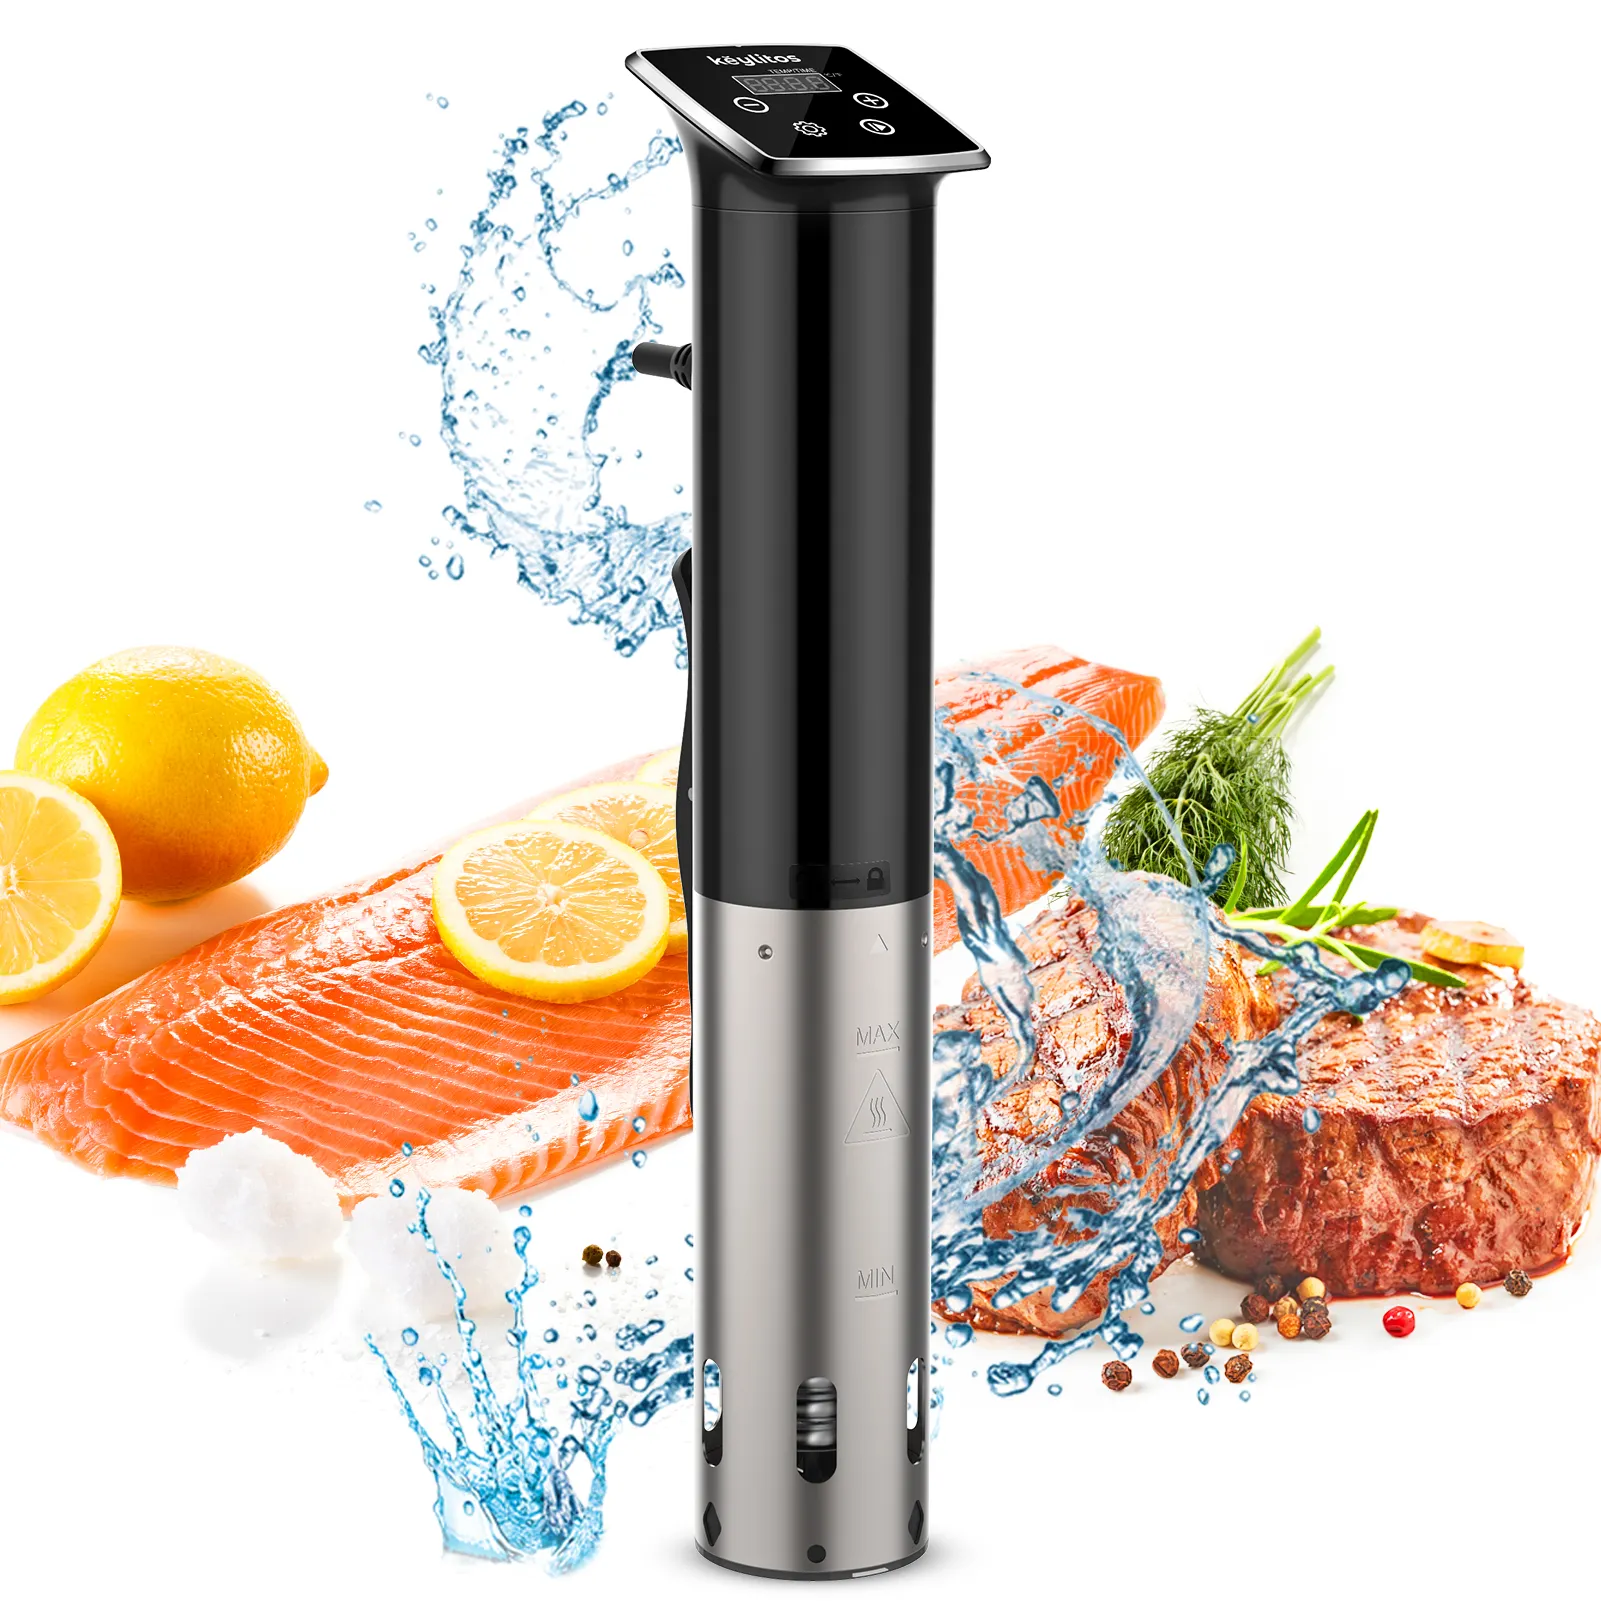 Poway Sous Vide machine 1100W IPX7 Slow Cooker precise temperature control household appliances healthy food